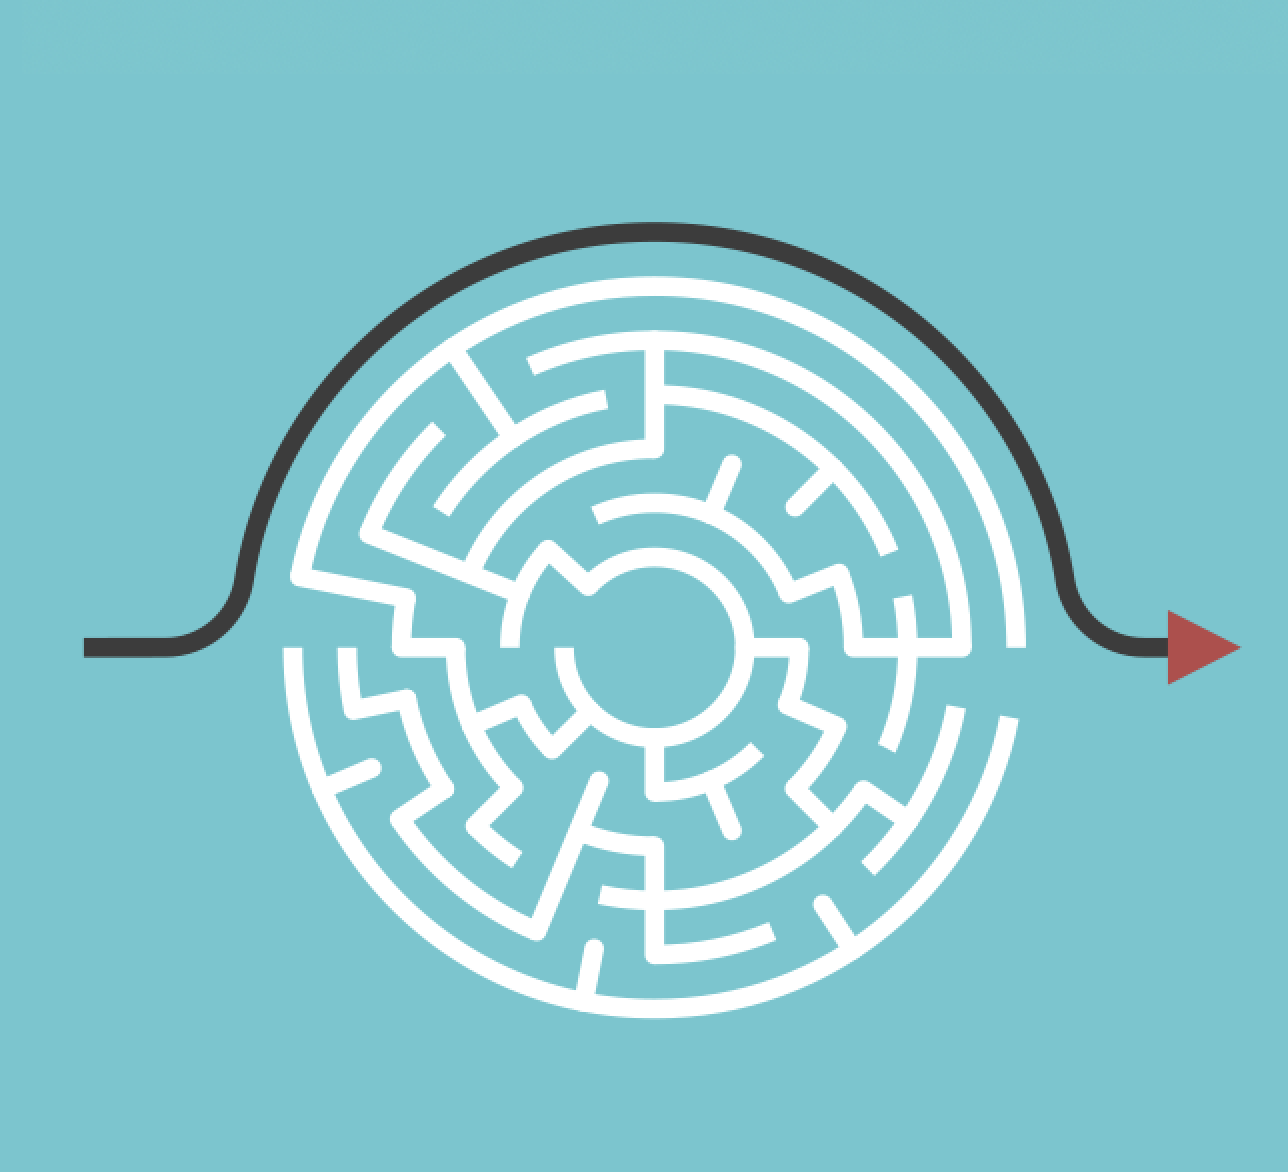 AML/KYC and GRC RegTech Proof of Concept art--a circular maze with a path on the outside edge to avoid the confusing maze